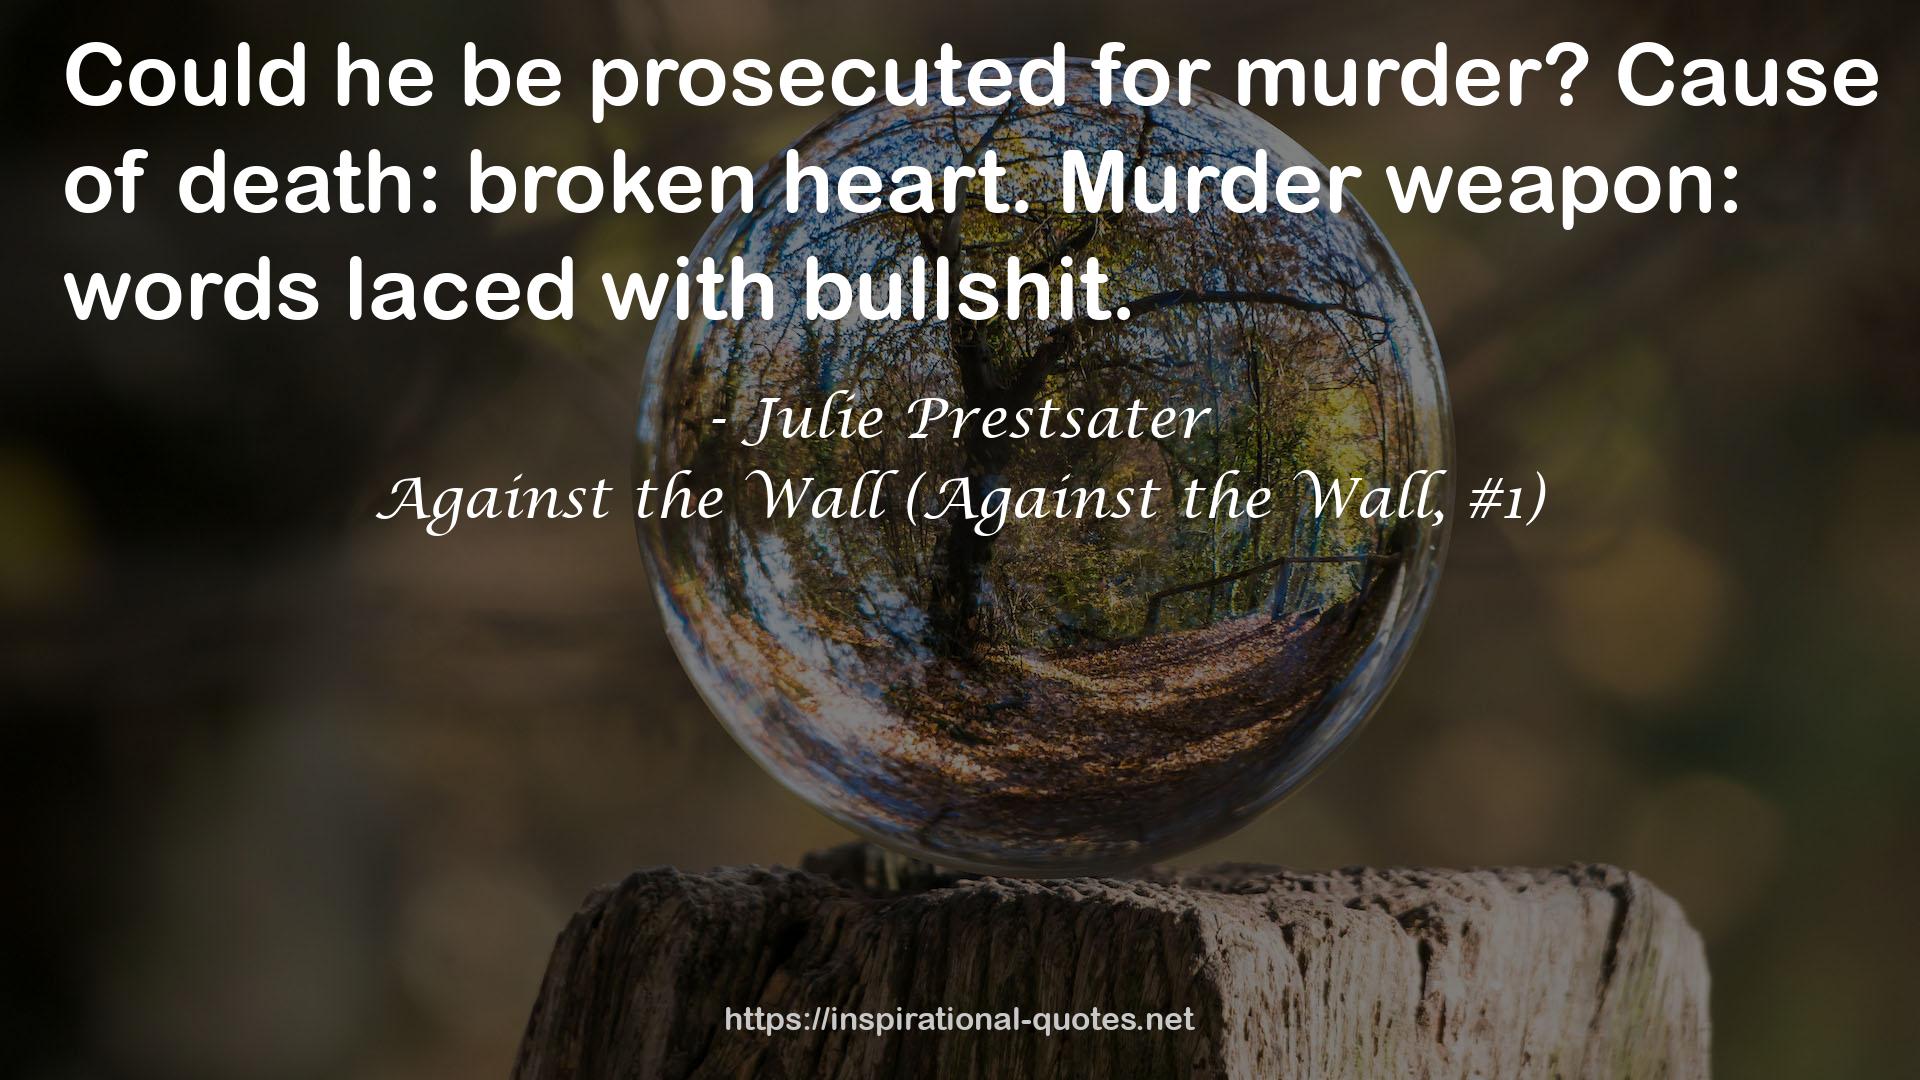 Against the Wall (Against the Wall, #1) QUOTES